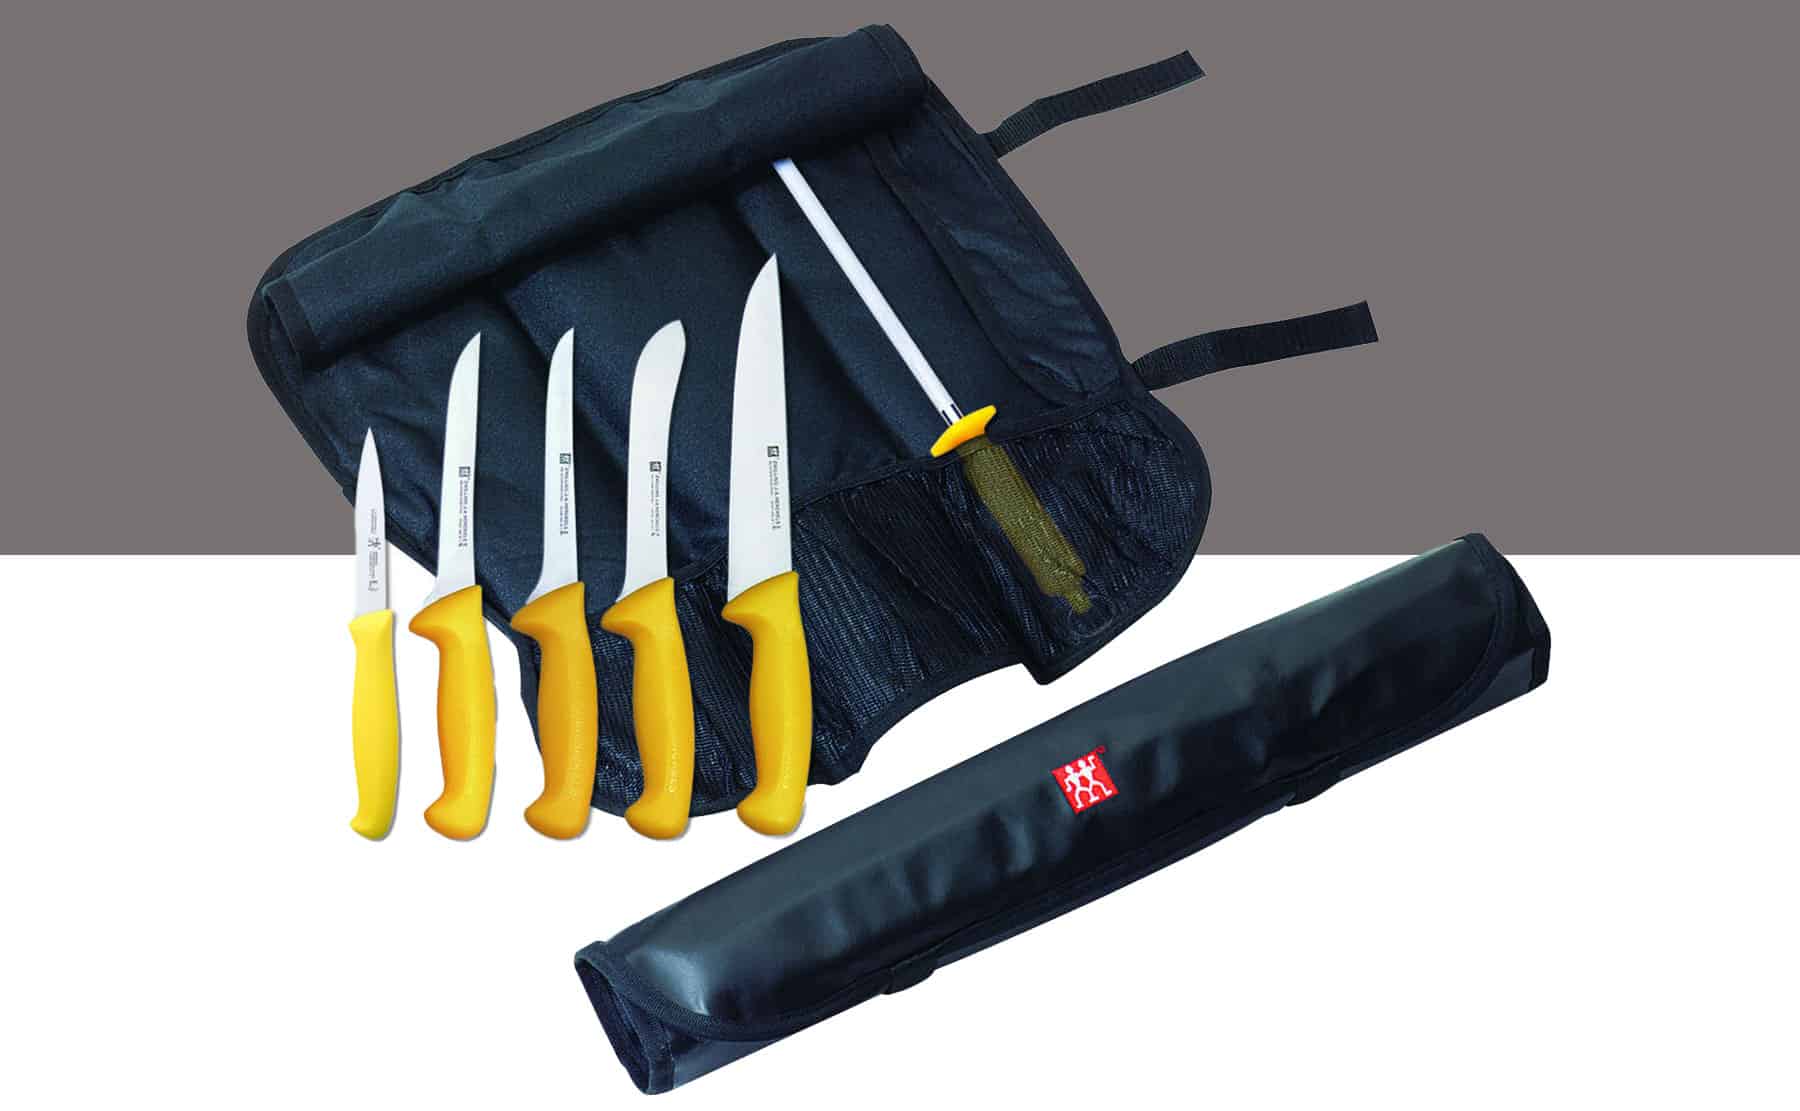 The Zwilling Twin Master kitchen knife series is perfect for barbecuing or camping.